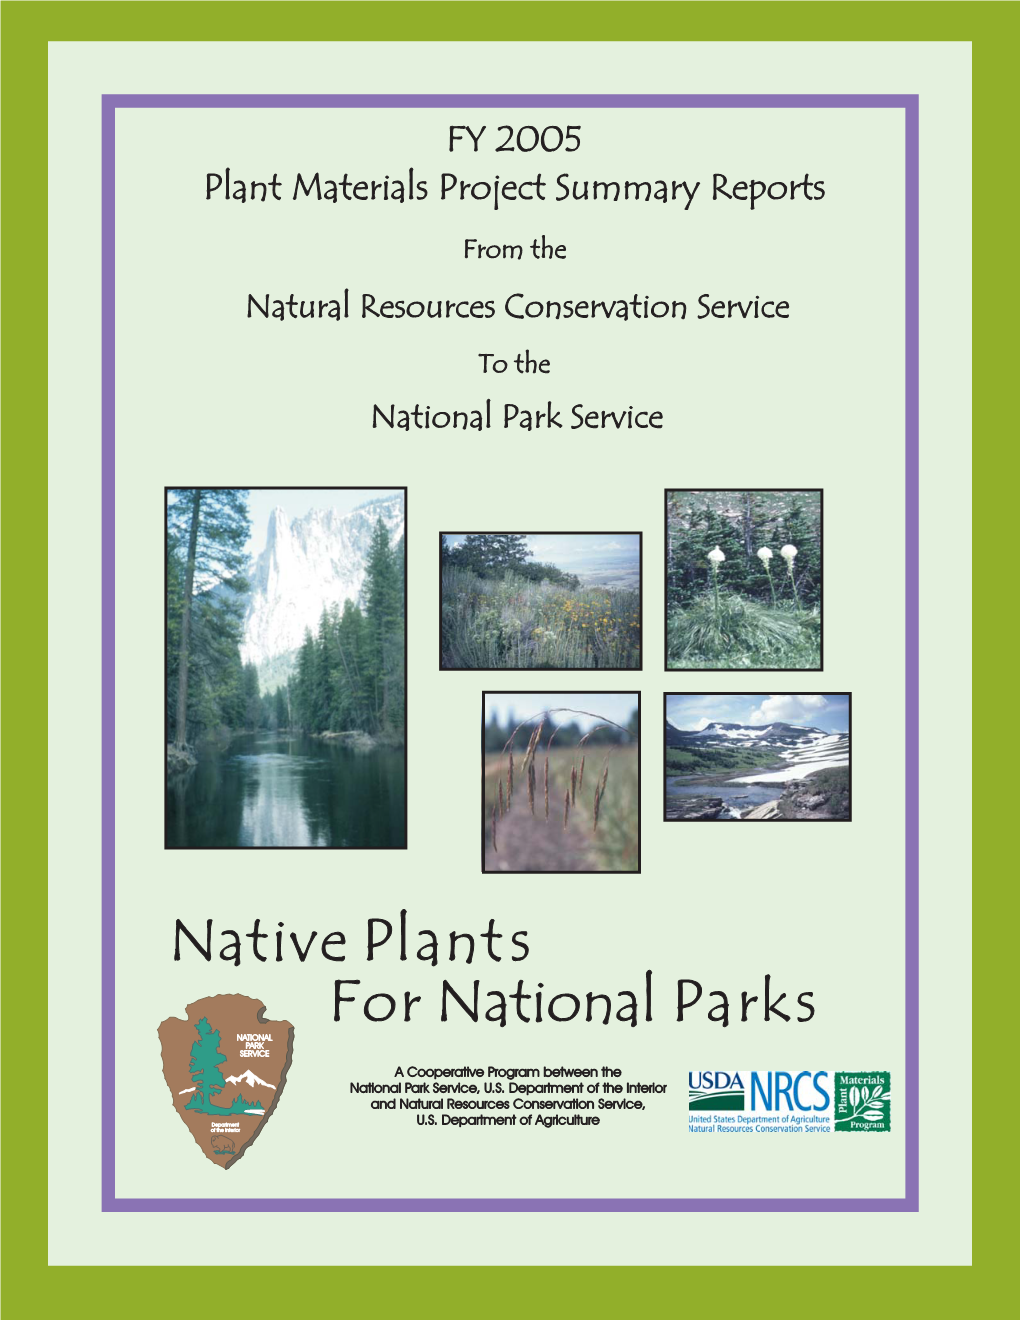 FY 2005 Plant Materials Project Summary Reports